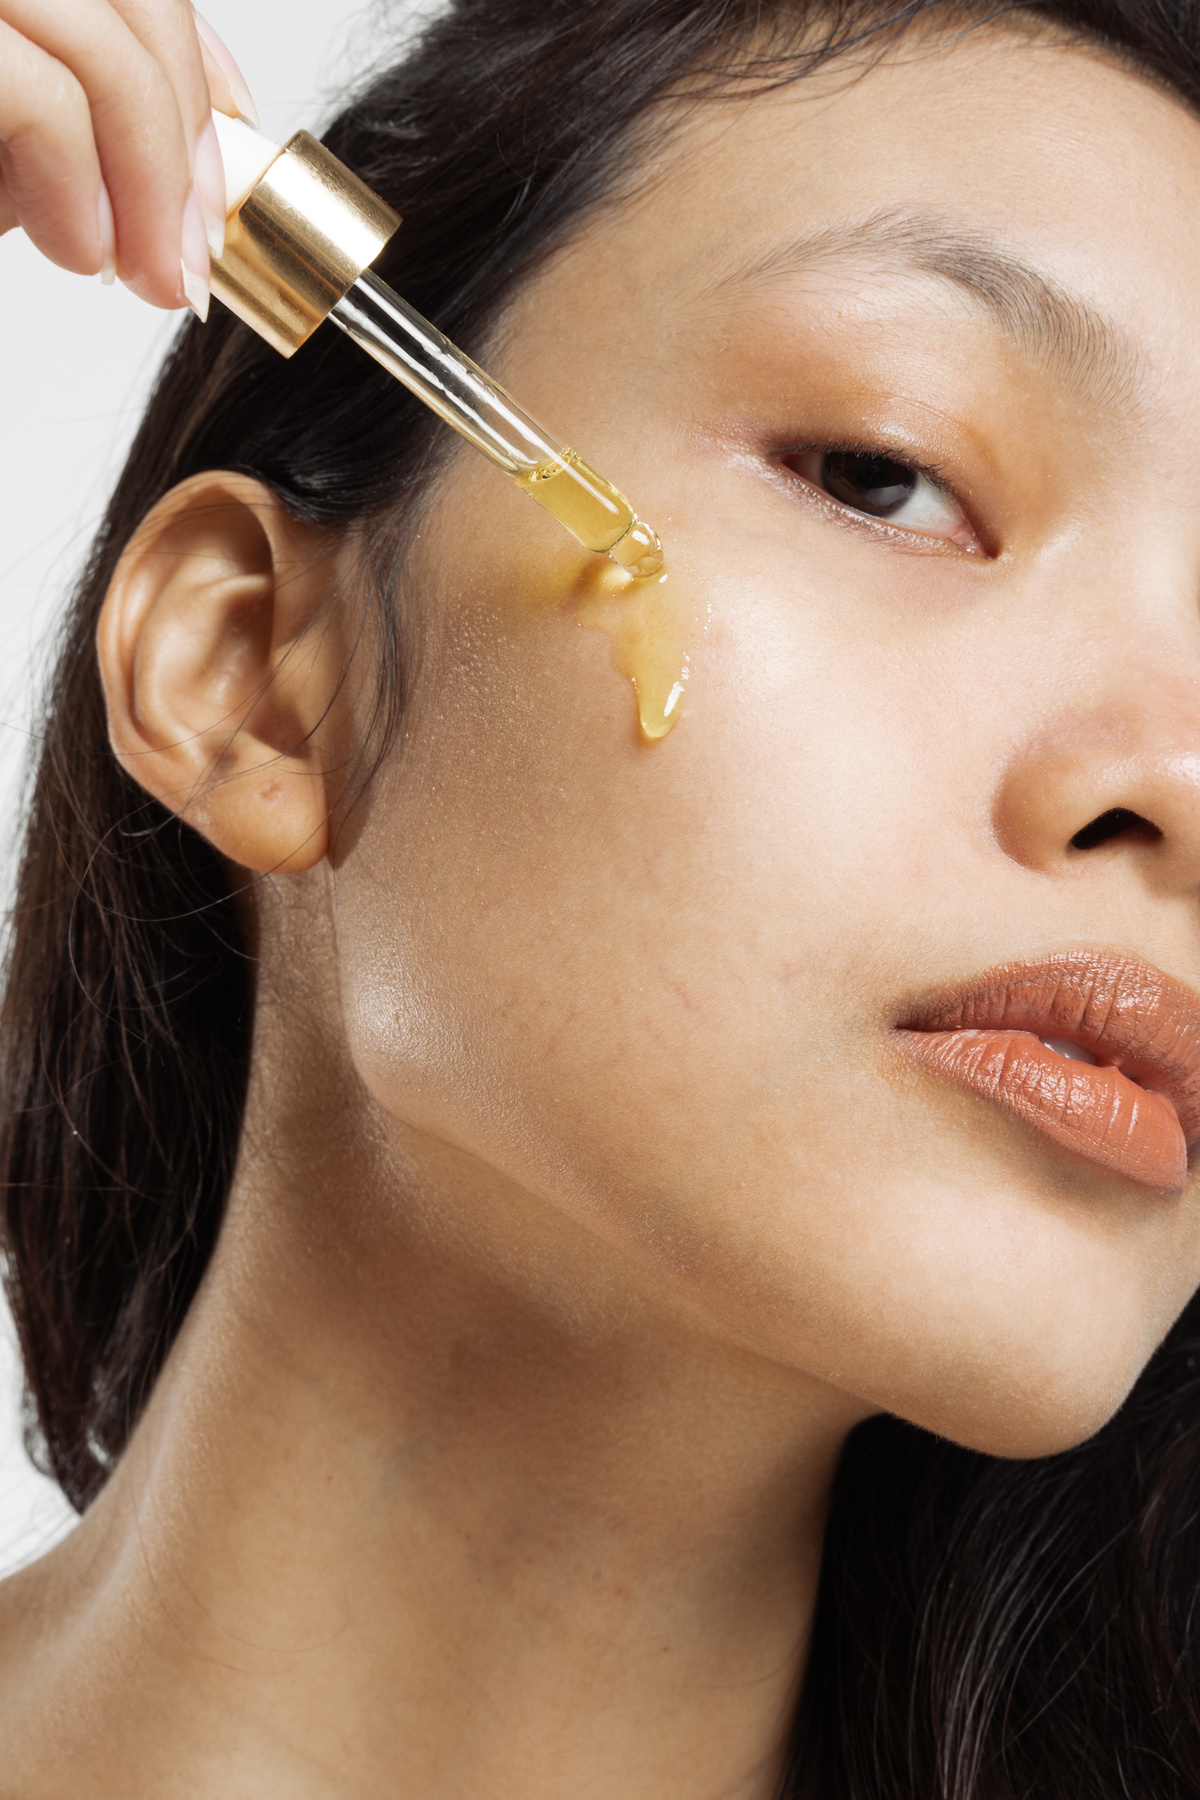 Closeup Portrait of Woman Applying Oil on Face with Dropper